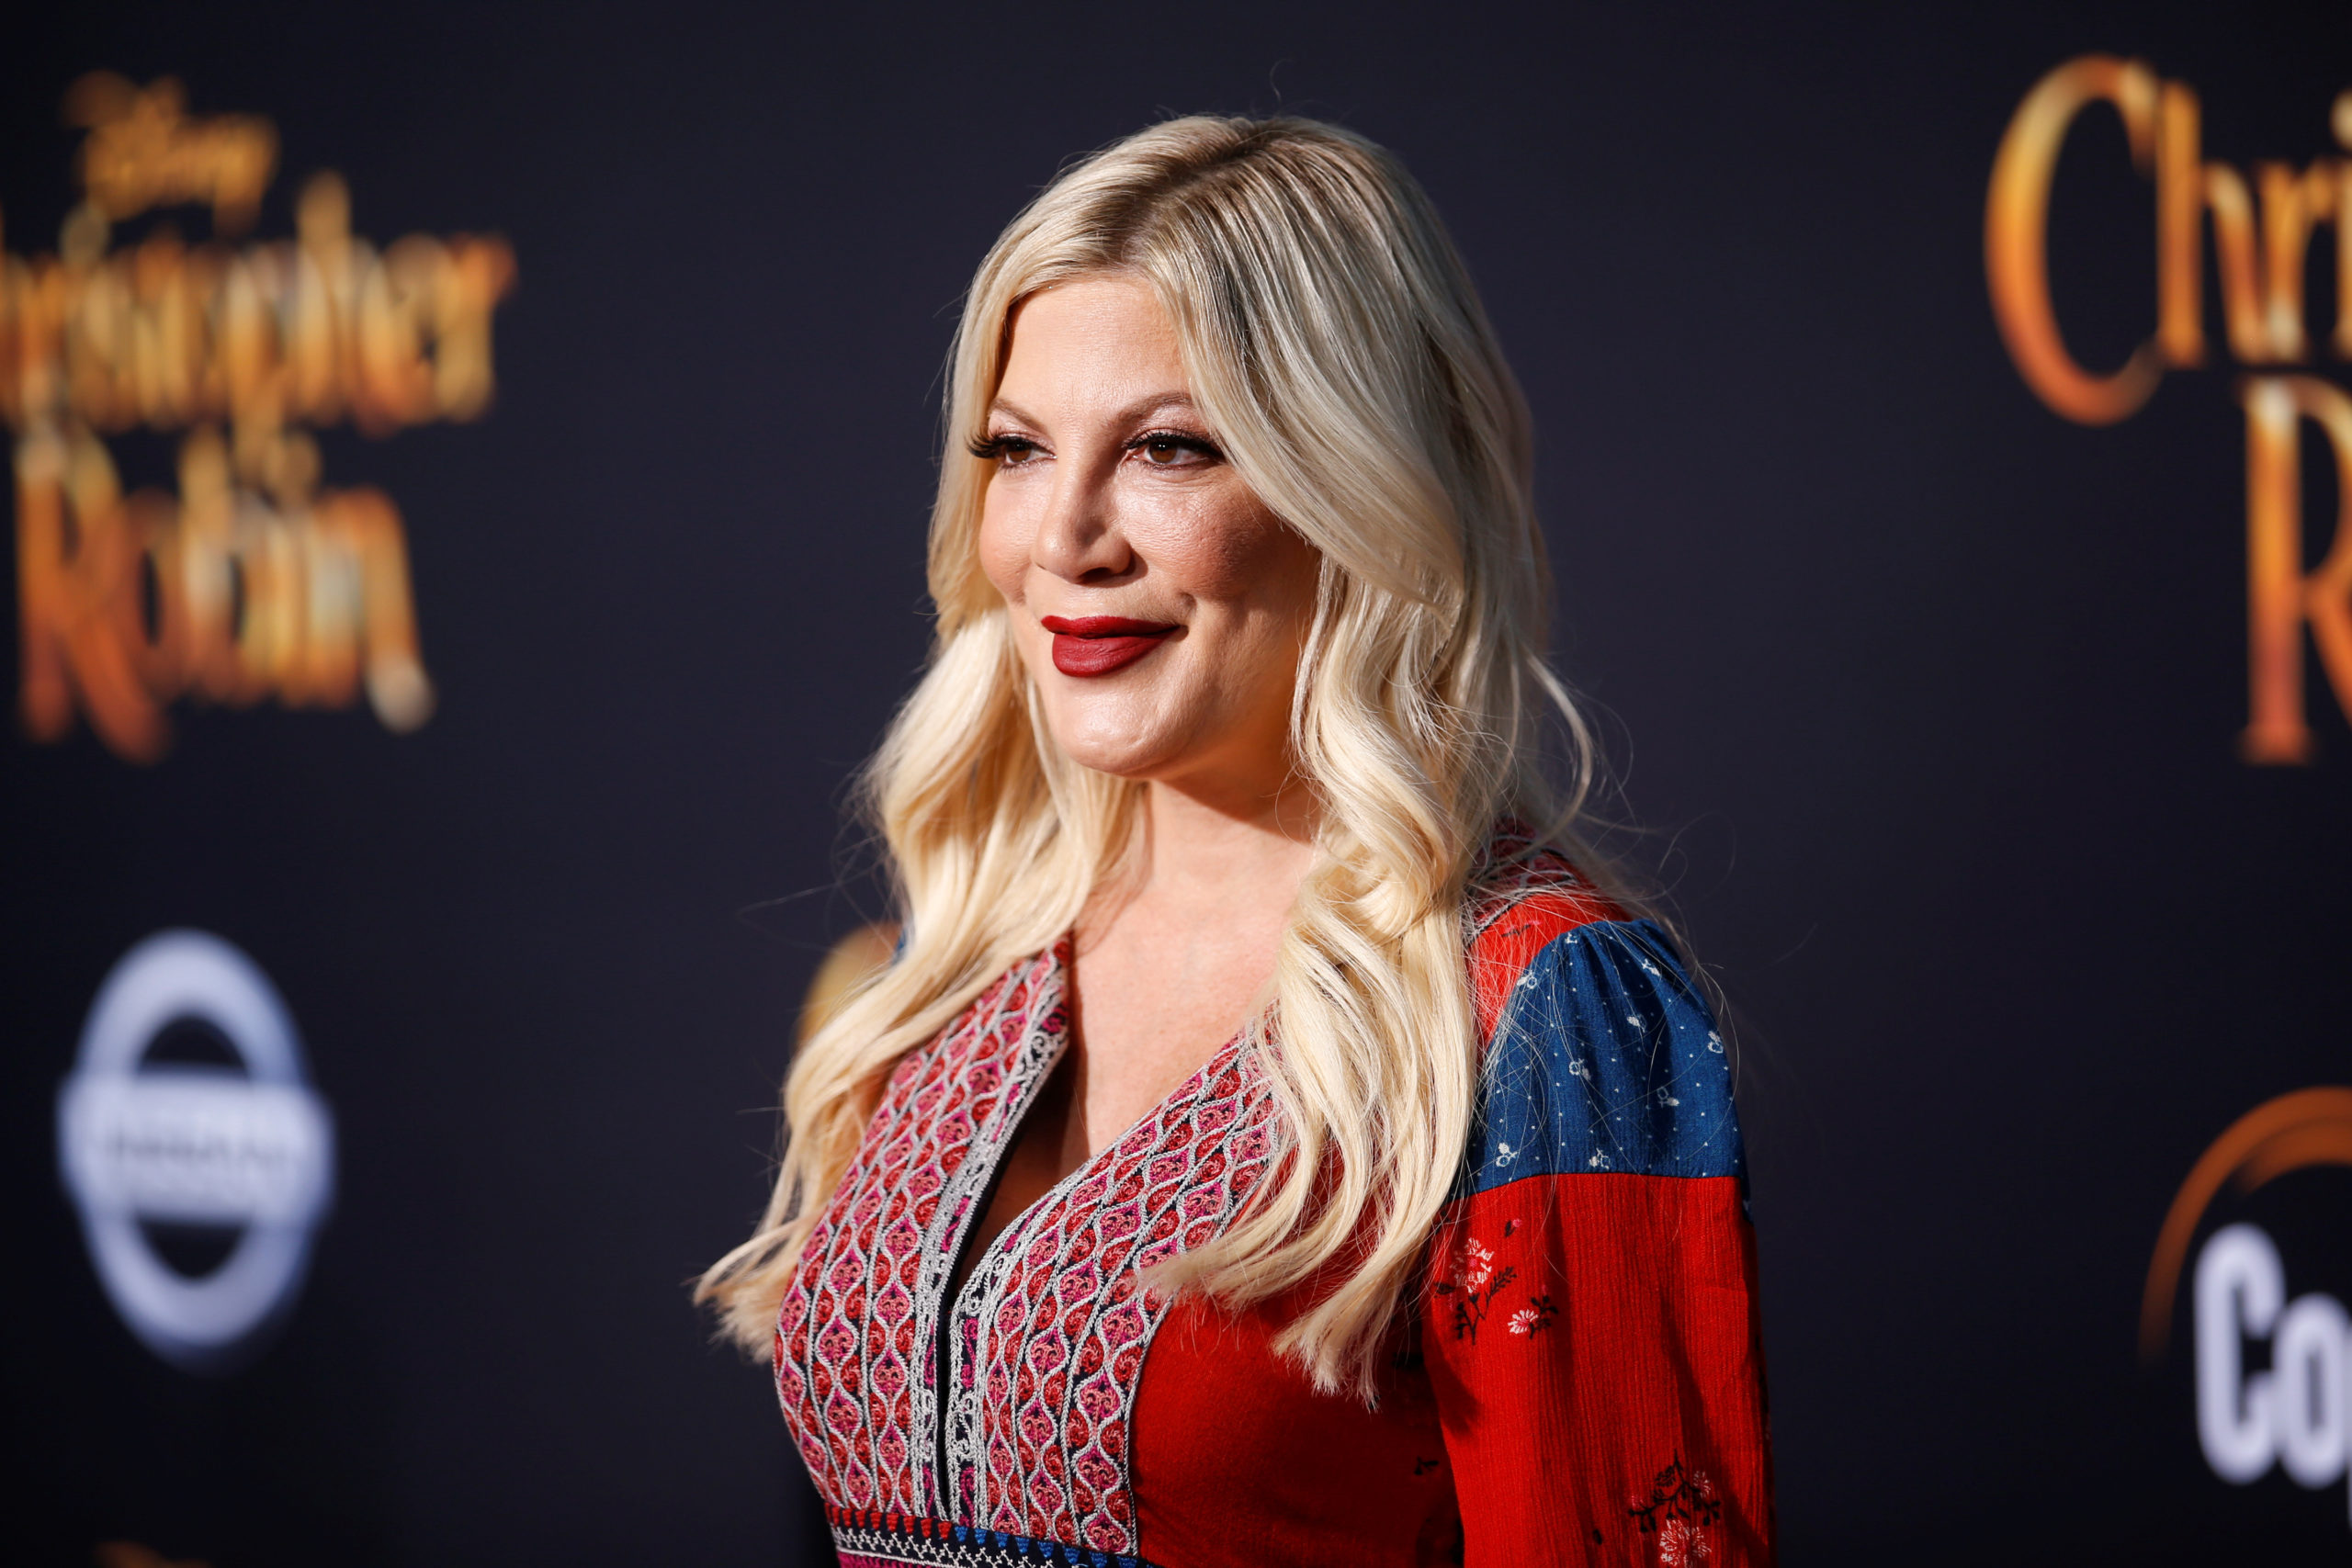 Actress Tori Spelling poses at the world premiere of Disney's "Christopher Robin," in Burbank, California, U.S., July 30, 2018. REUTERS/Danny Moloshok